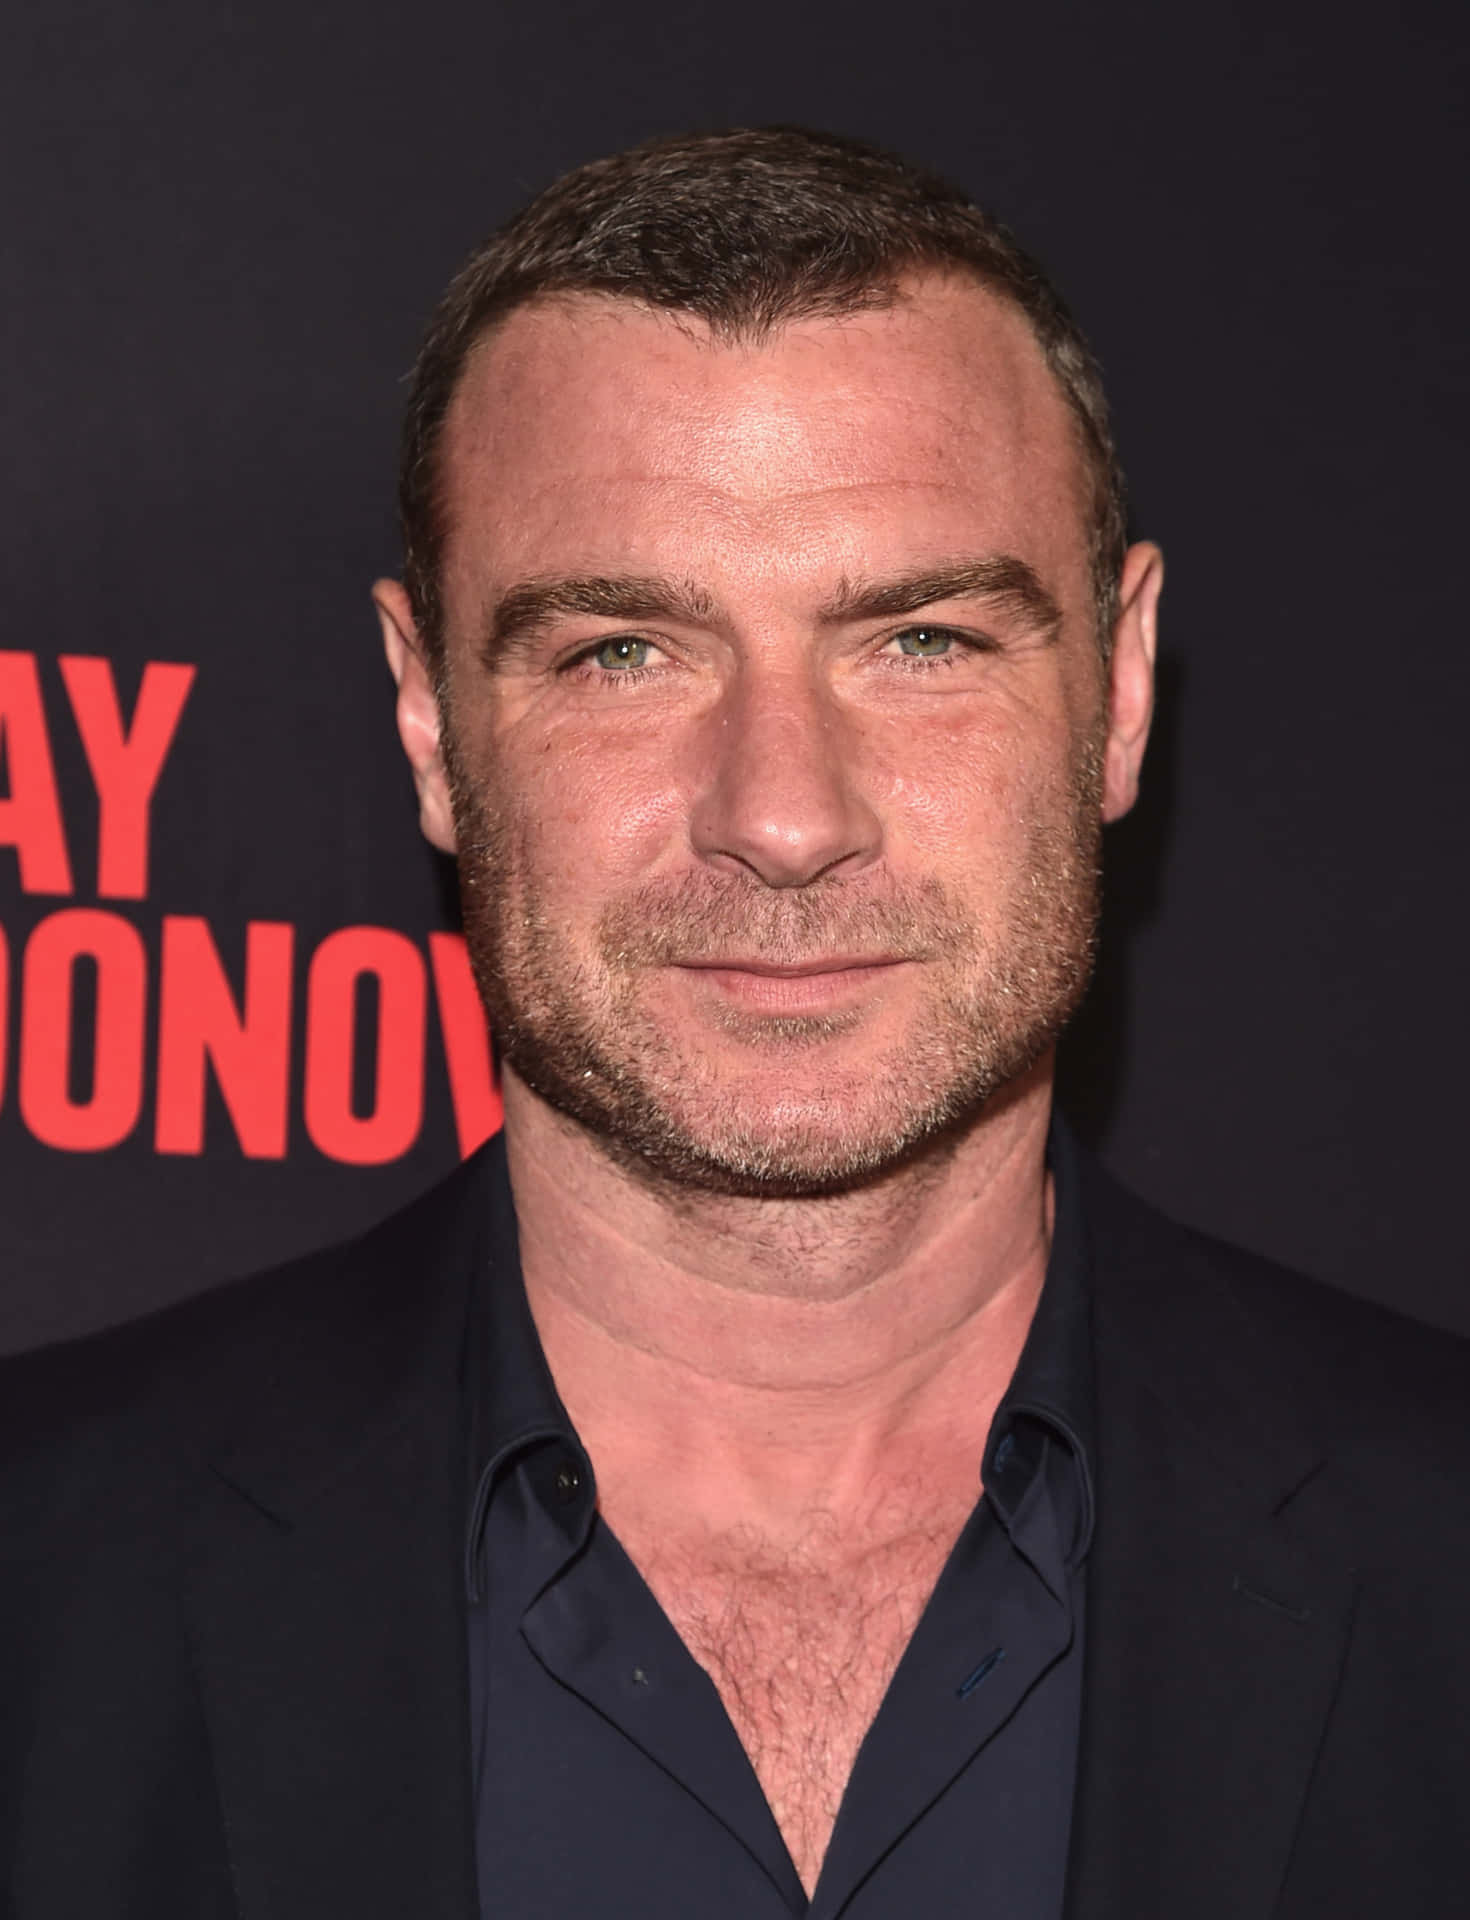 Pensive Liev Schreiber in a black-and-white shot. Wallpaper